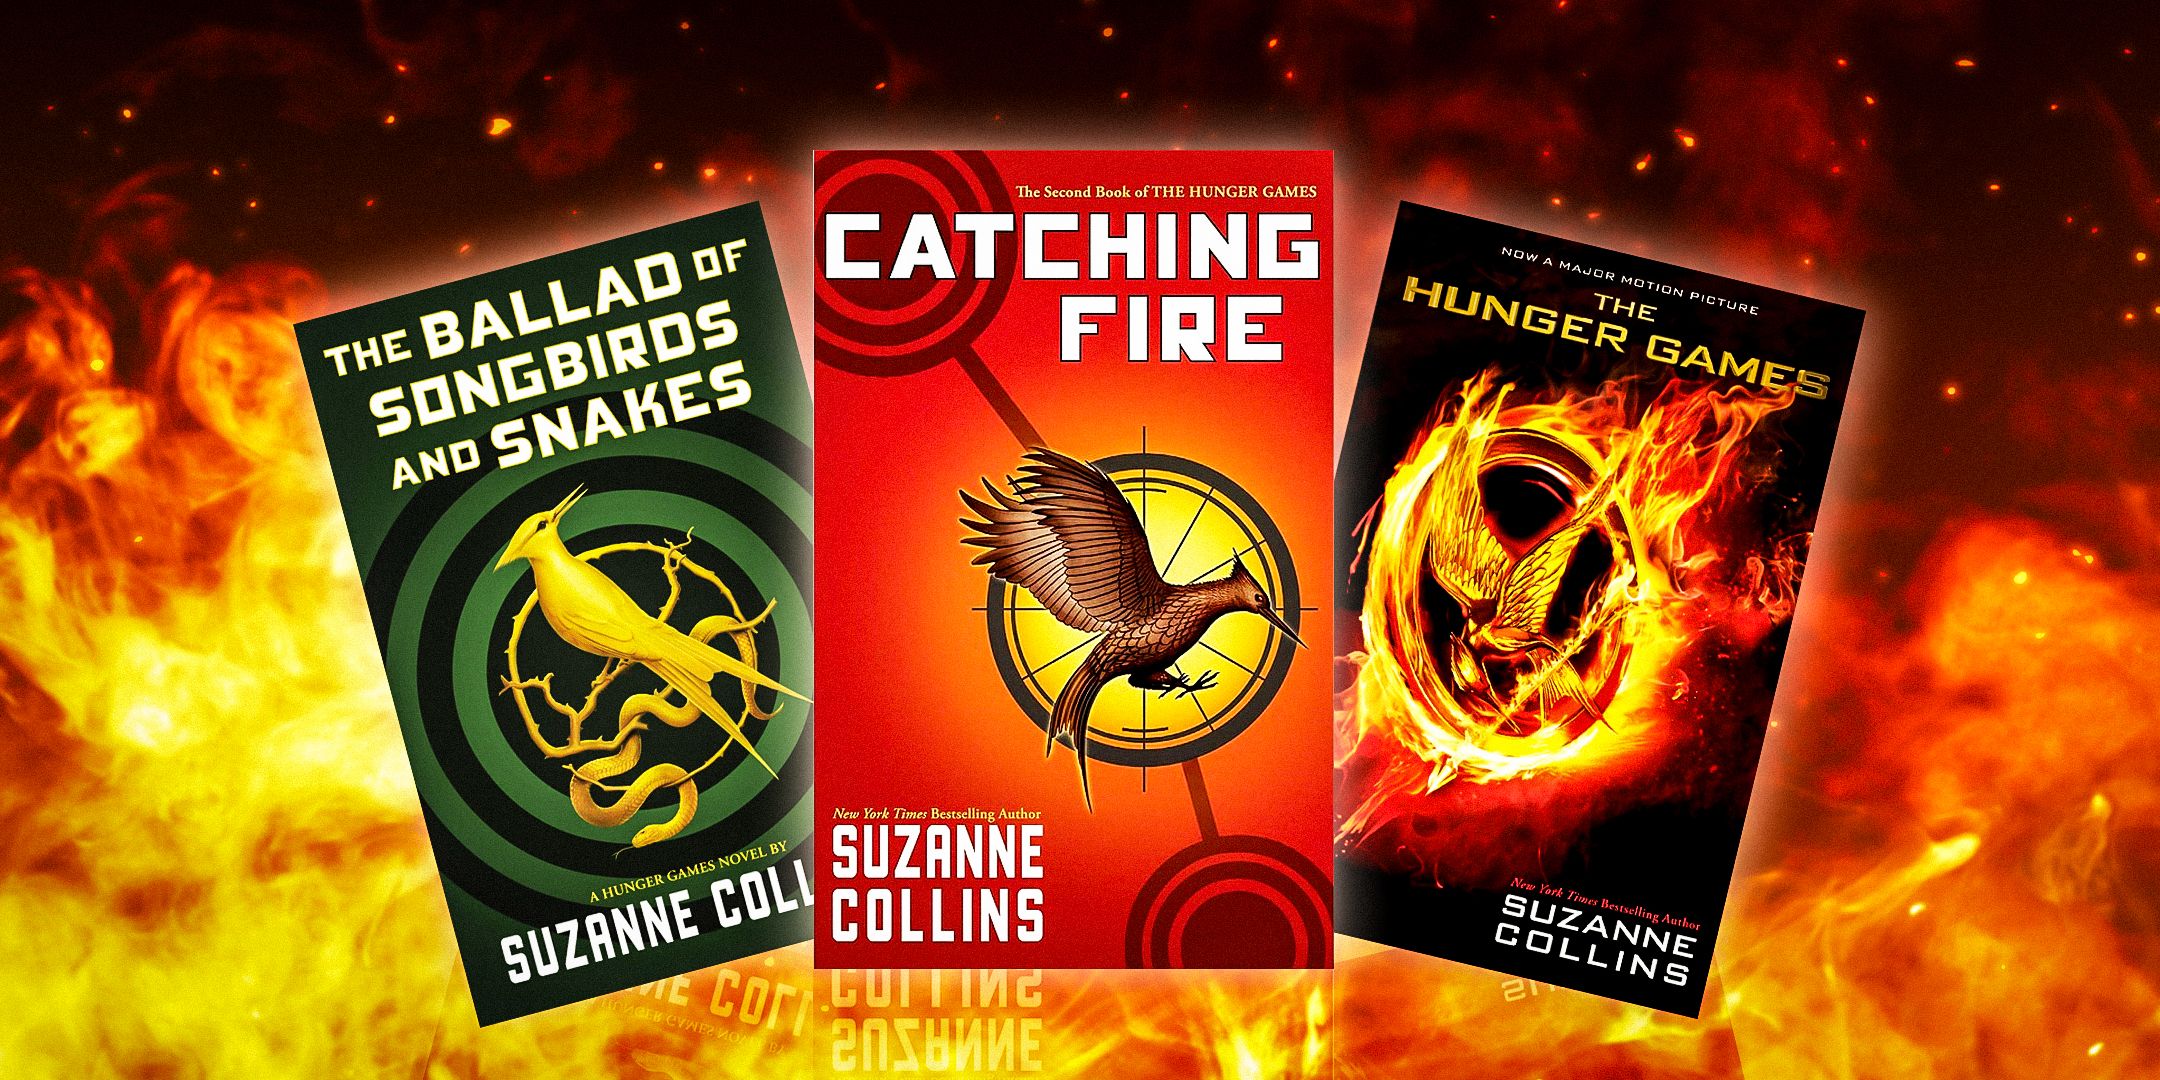 The covers of The Ballad of Songbirds and Snakes, Catching Fire, and The Hunger Games against a fiery background